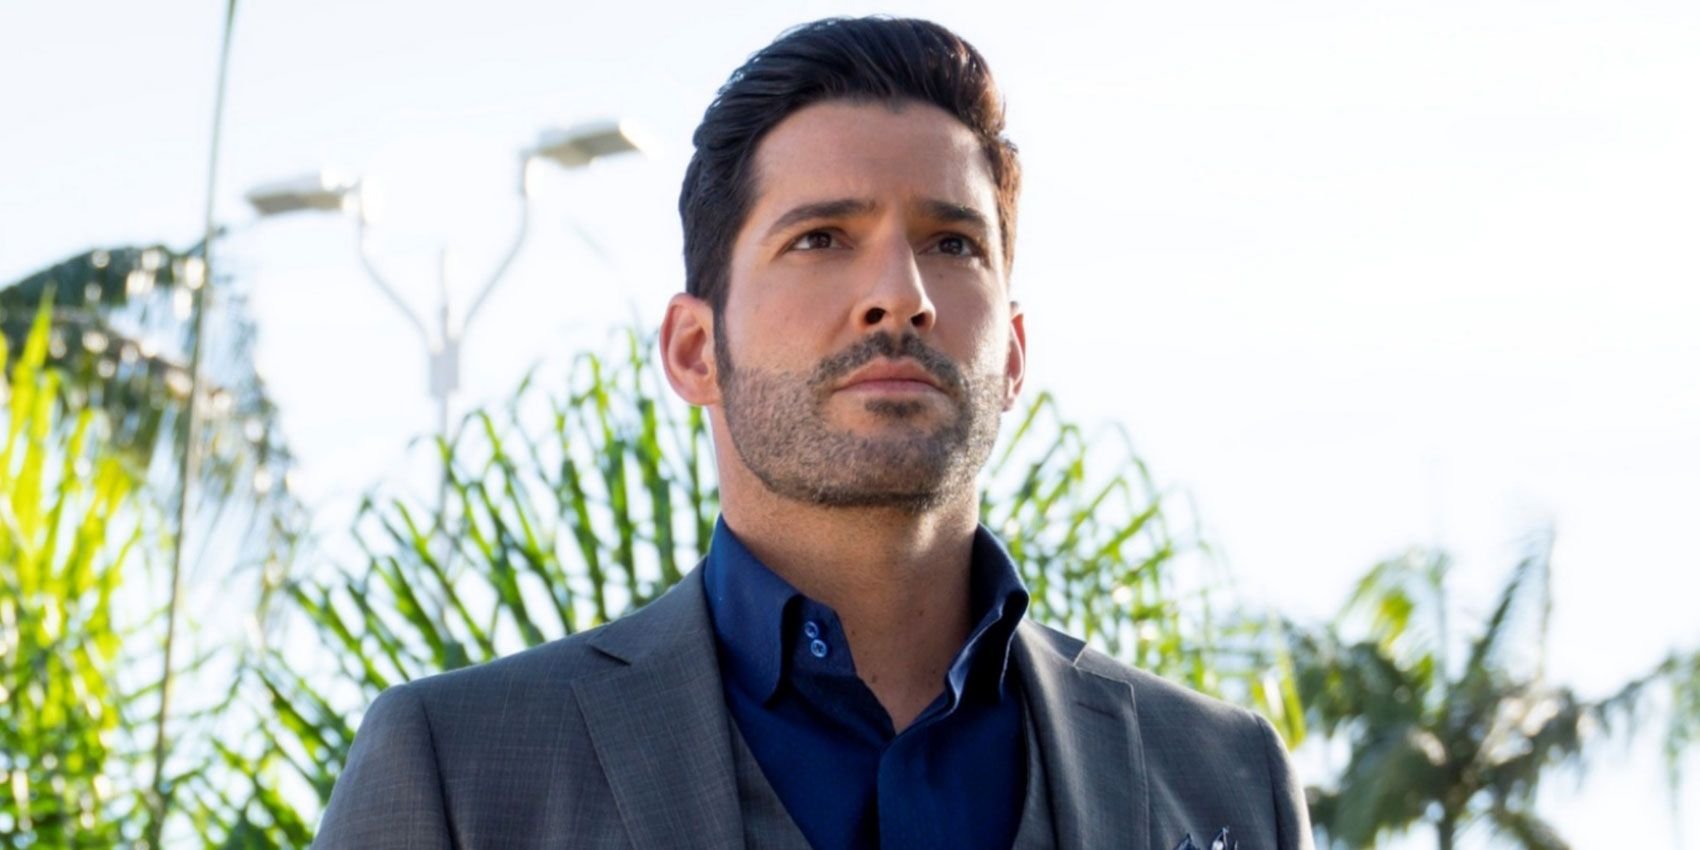 'Lucifer': Tom Ellis on the Final Episodes of Season 5, Being Friends With Debbie Gibson, and Saying Goodbye